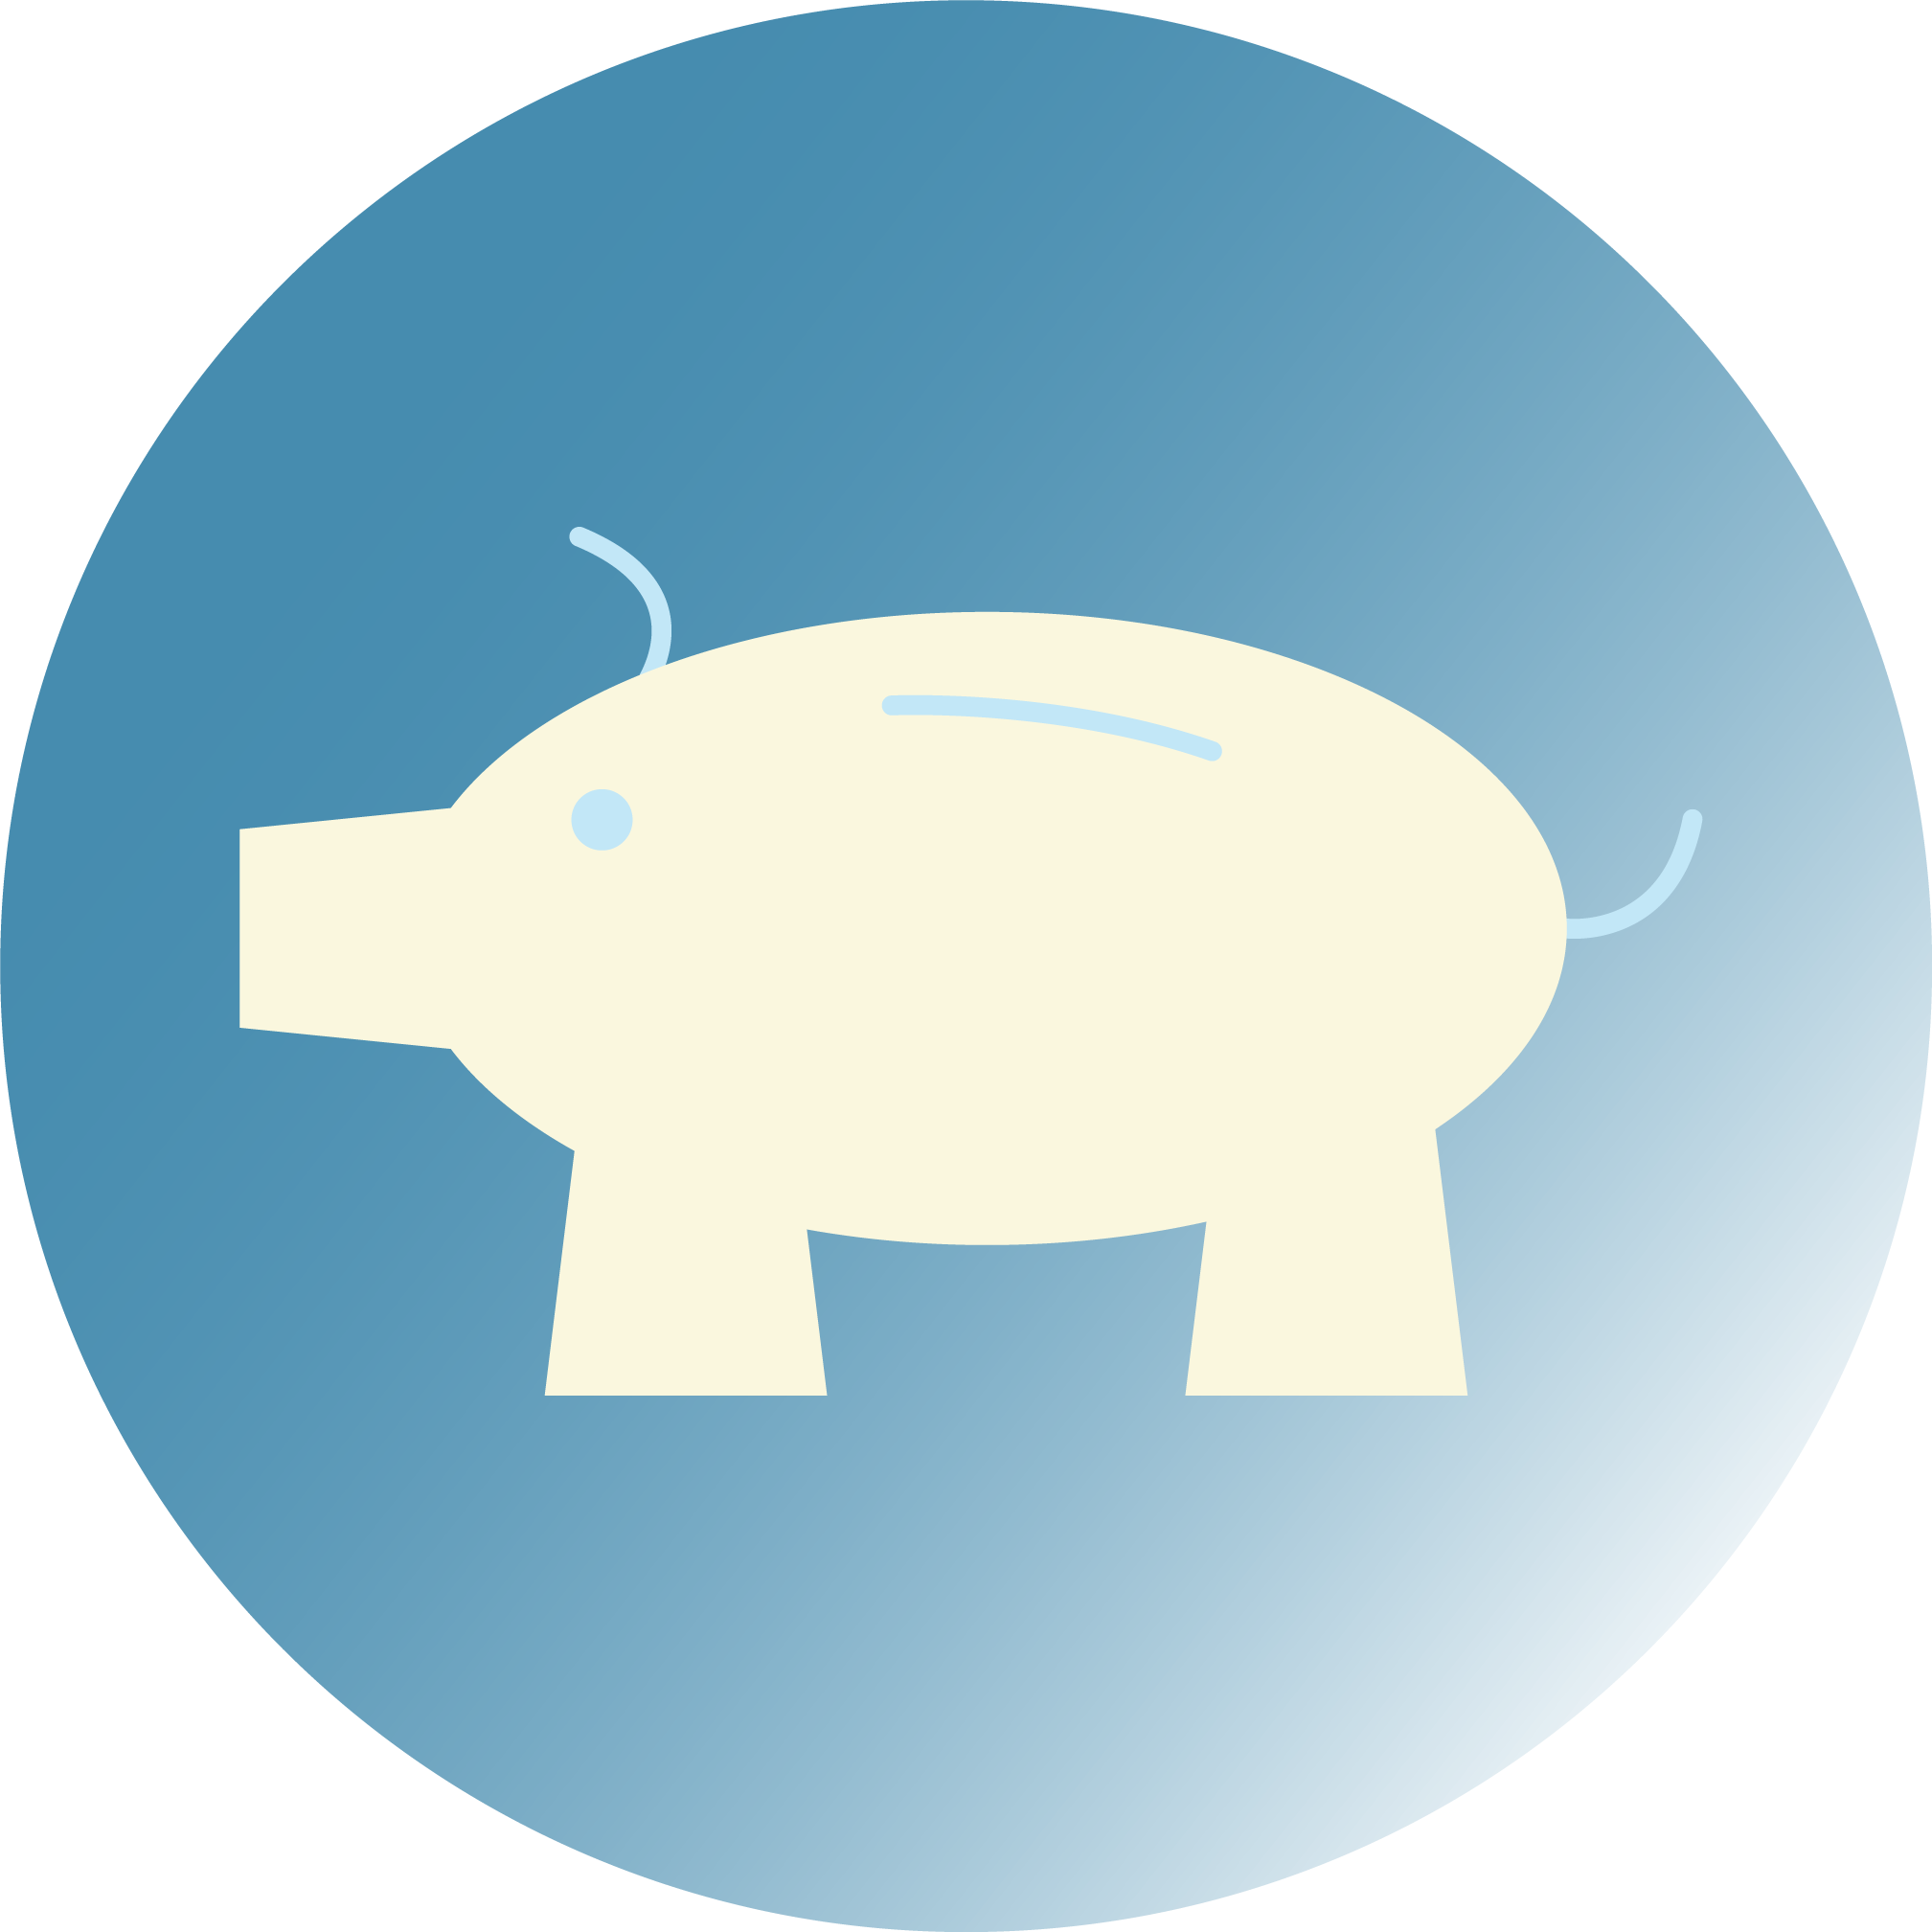 piggy bank icon to demonstrate internal funding